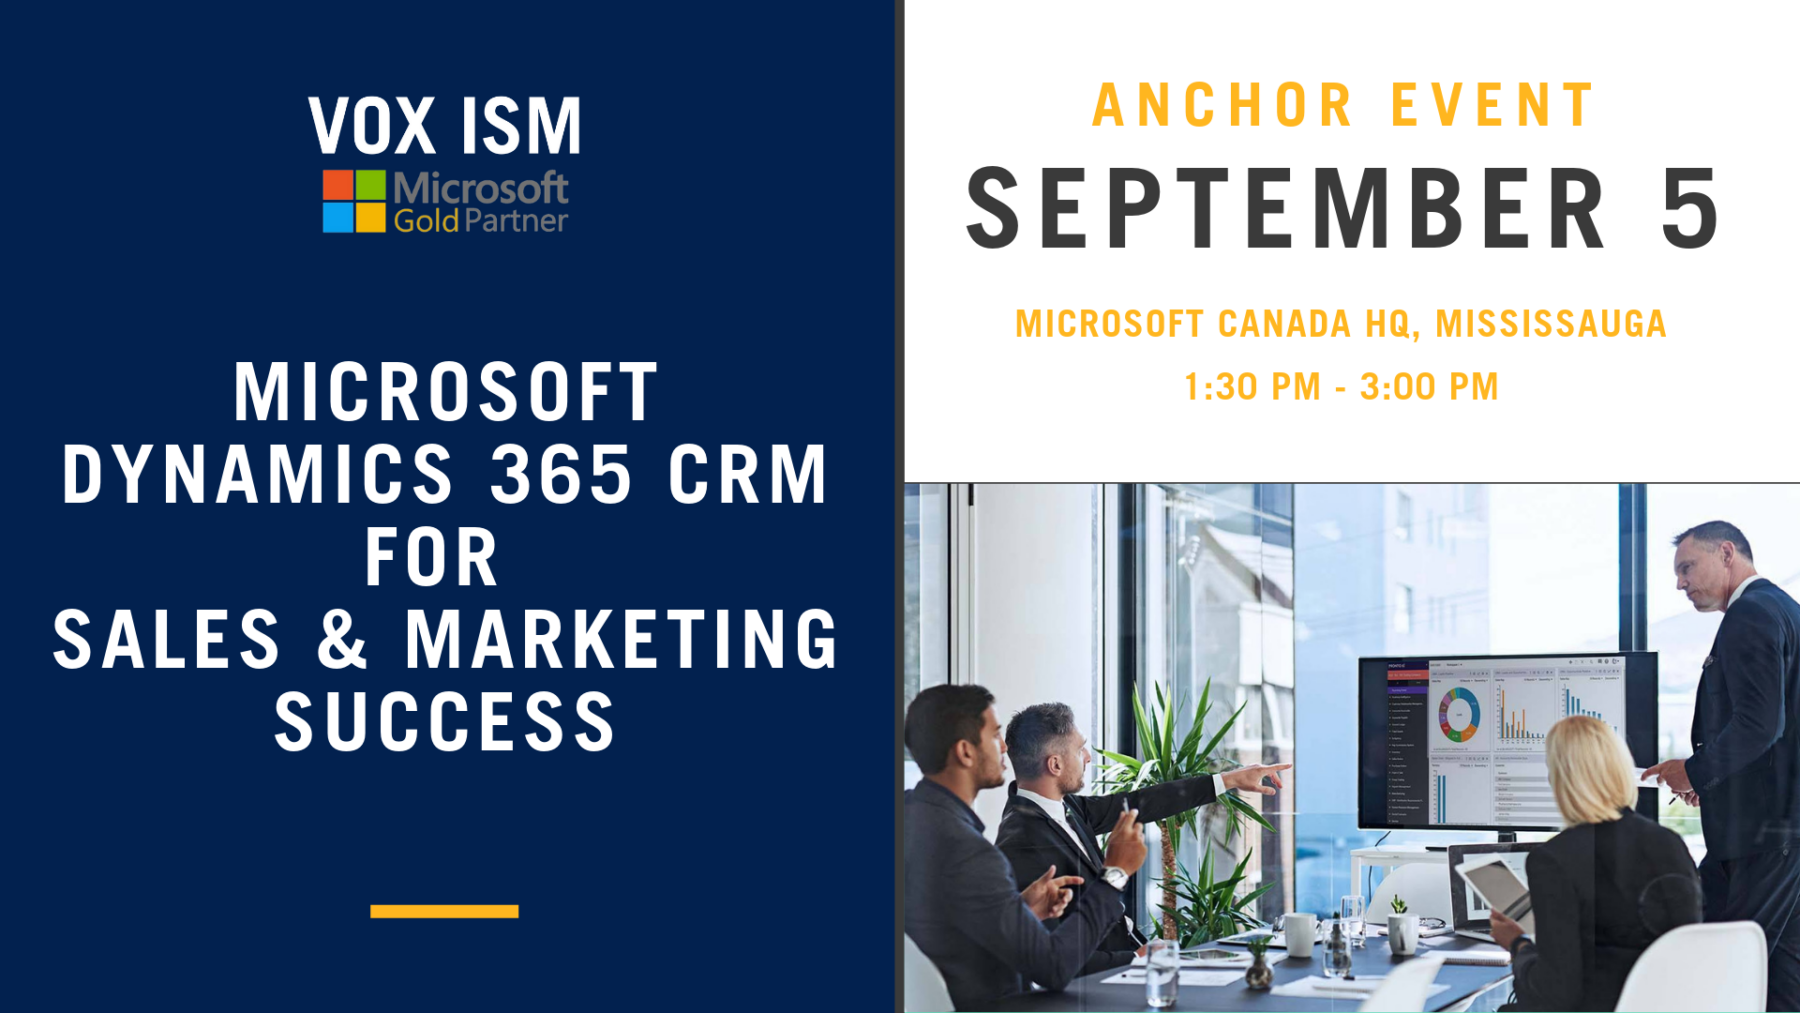 Microsoft Dynamics 365 CRM For Sales & Marketing Success - September 5 - Anchor Event - VOX ISM